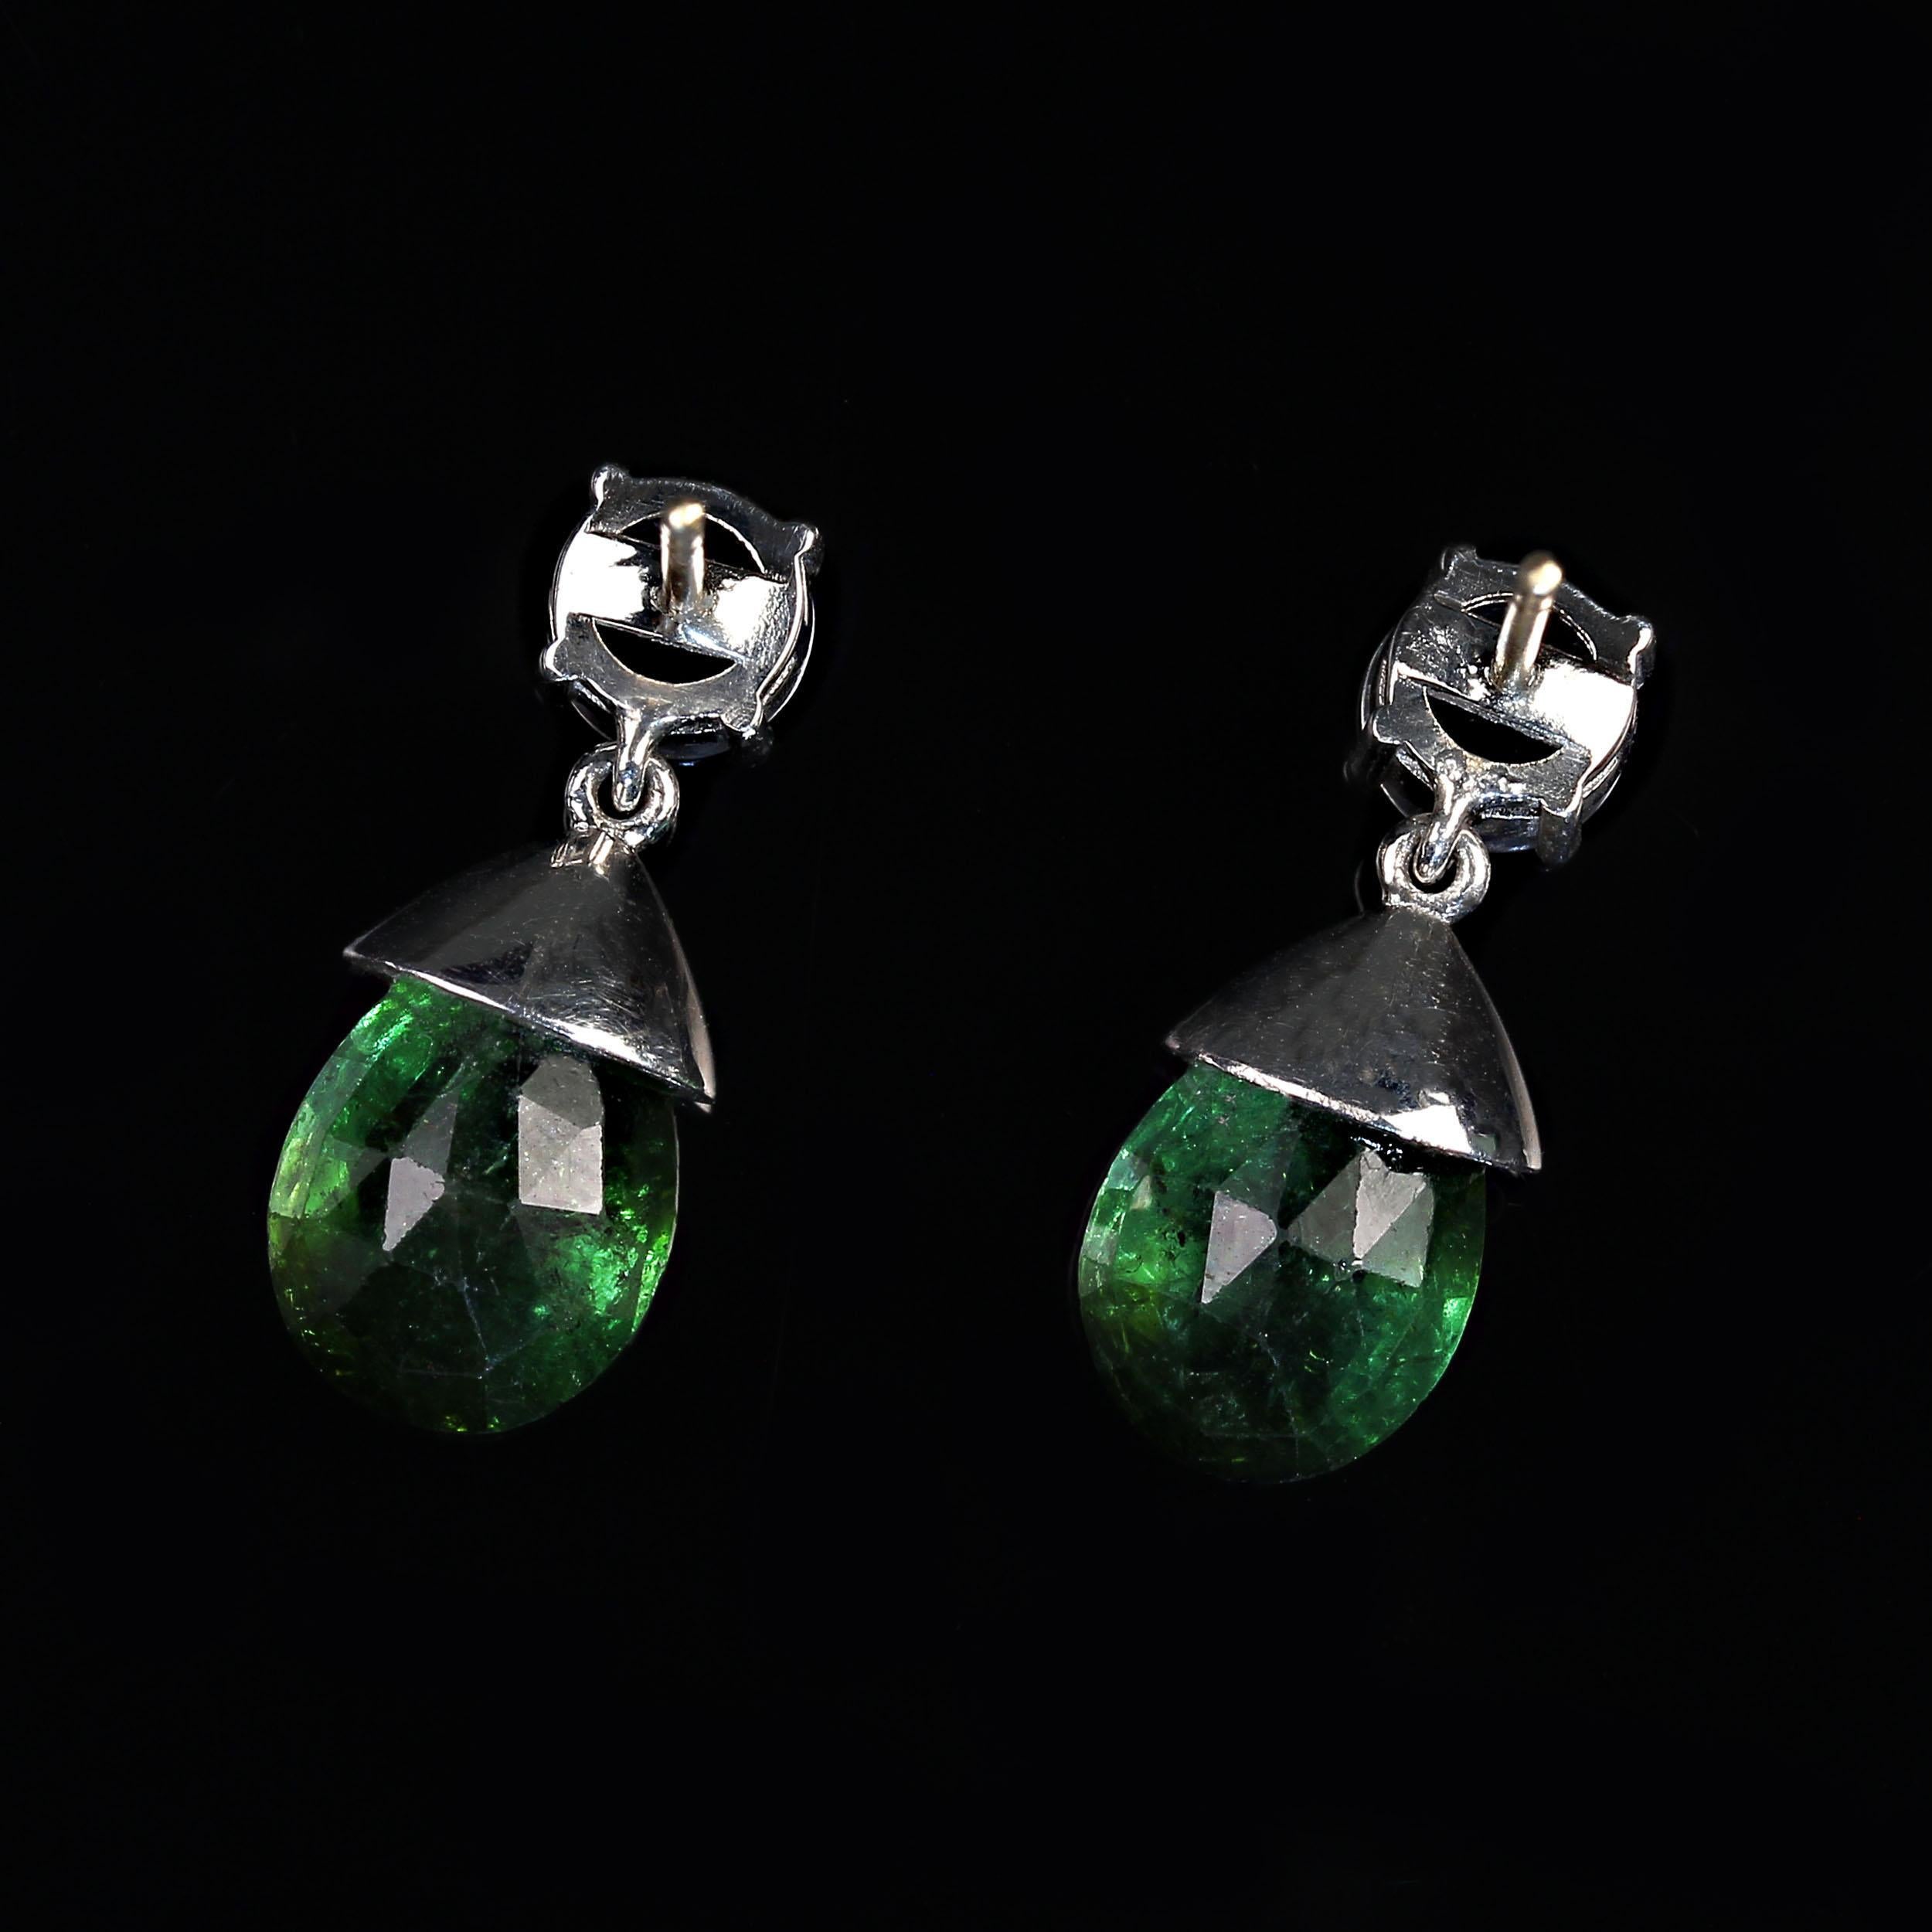 Artisan AJD Elegant Evening Earrings of Genuine Zircons and Green Tourmalines For Sale